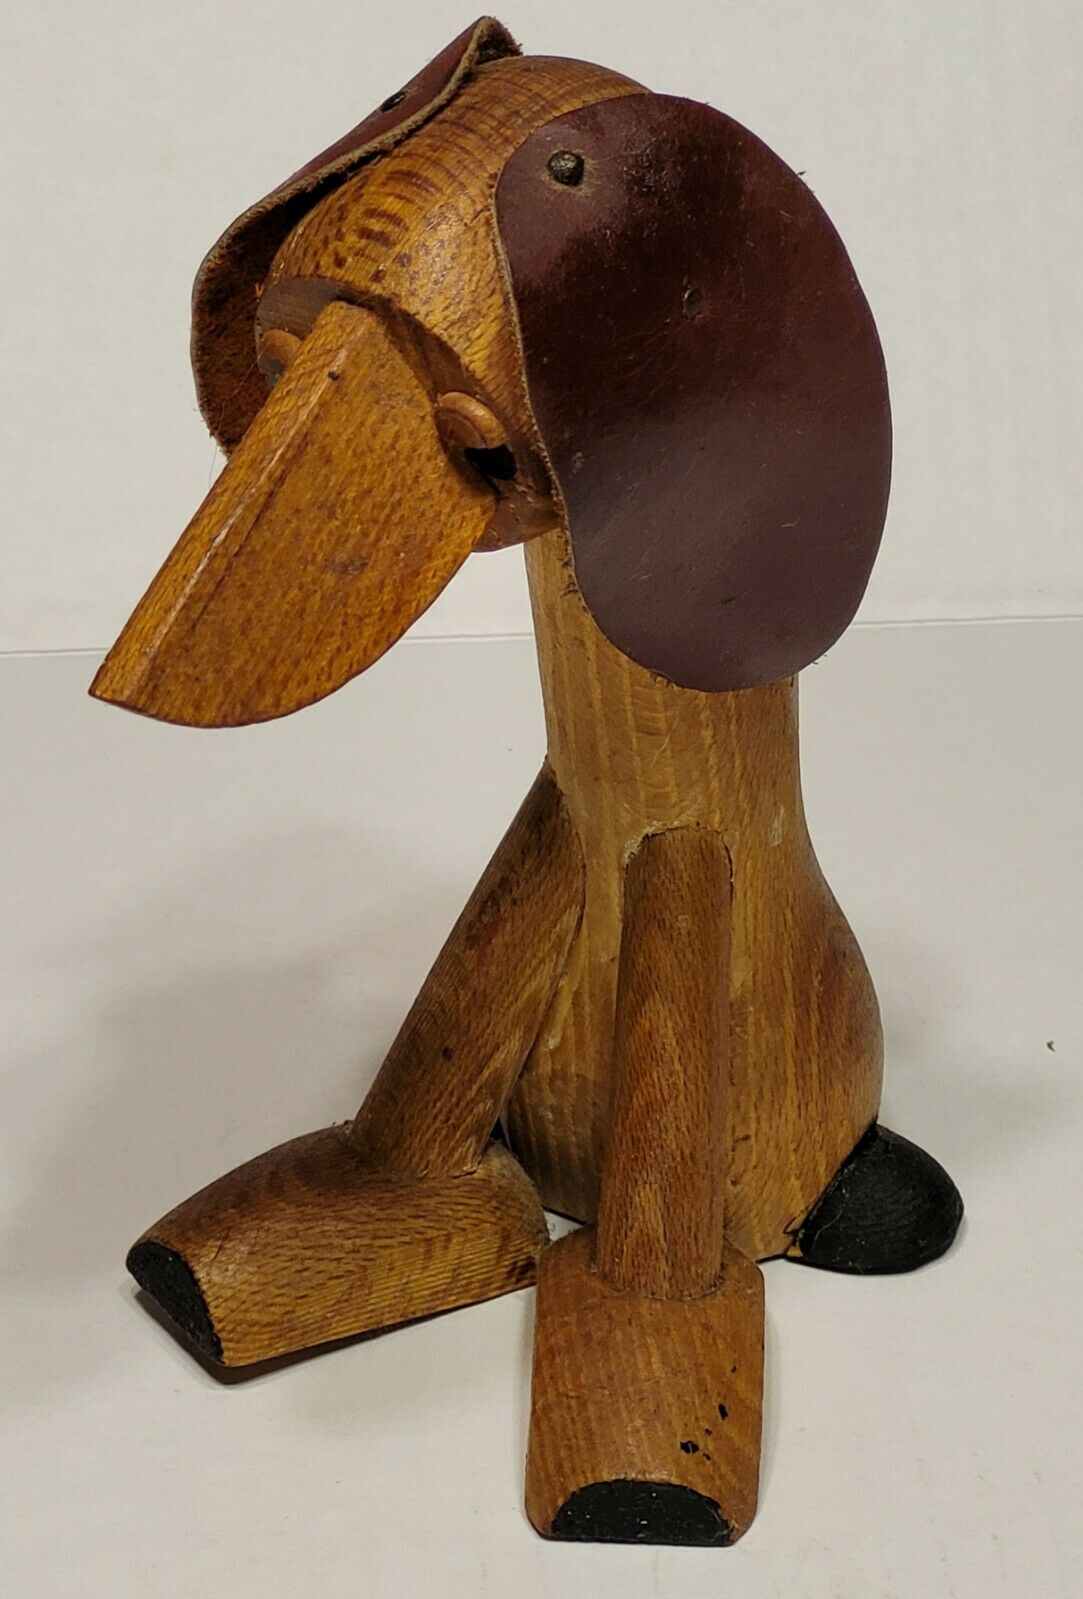 Vintage Wooden Hound Dog Student Craft Project Leather Ears 6 1/2" Tall